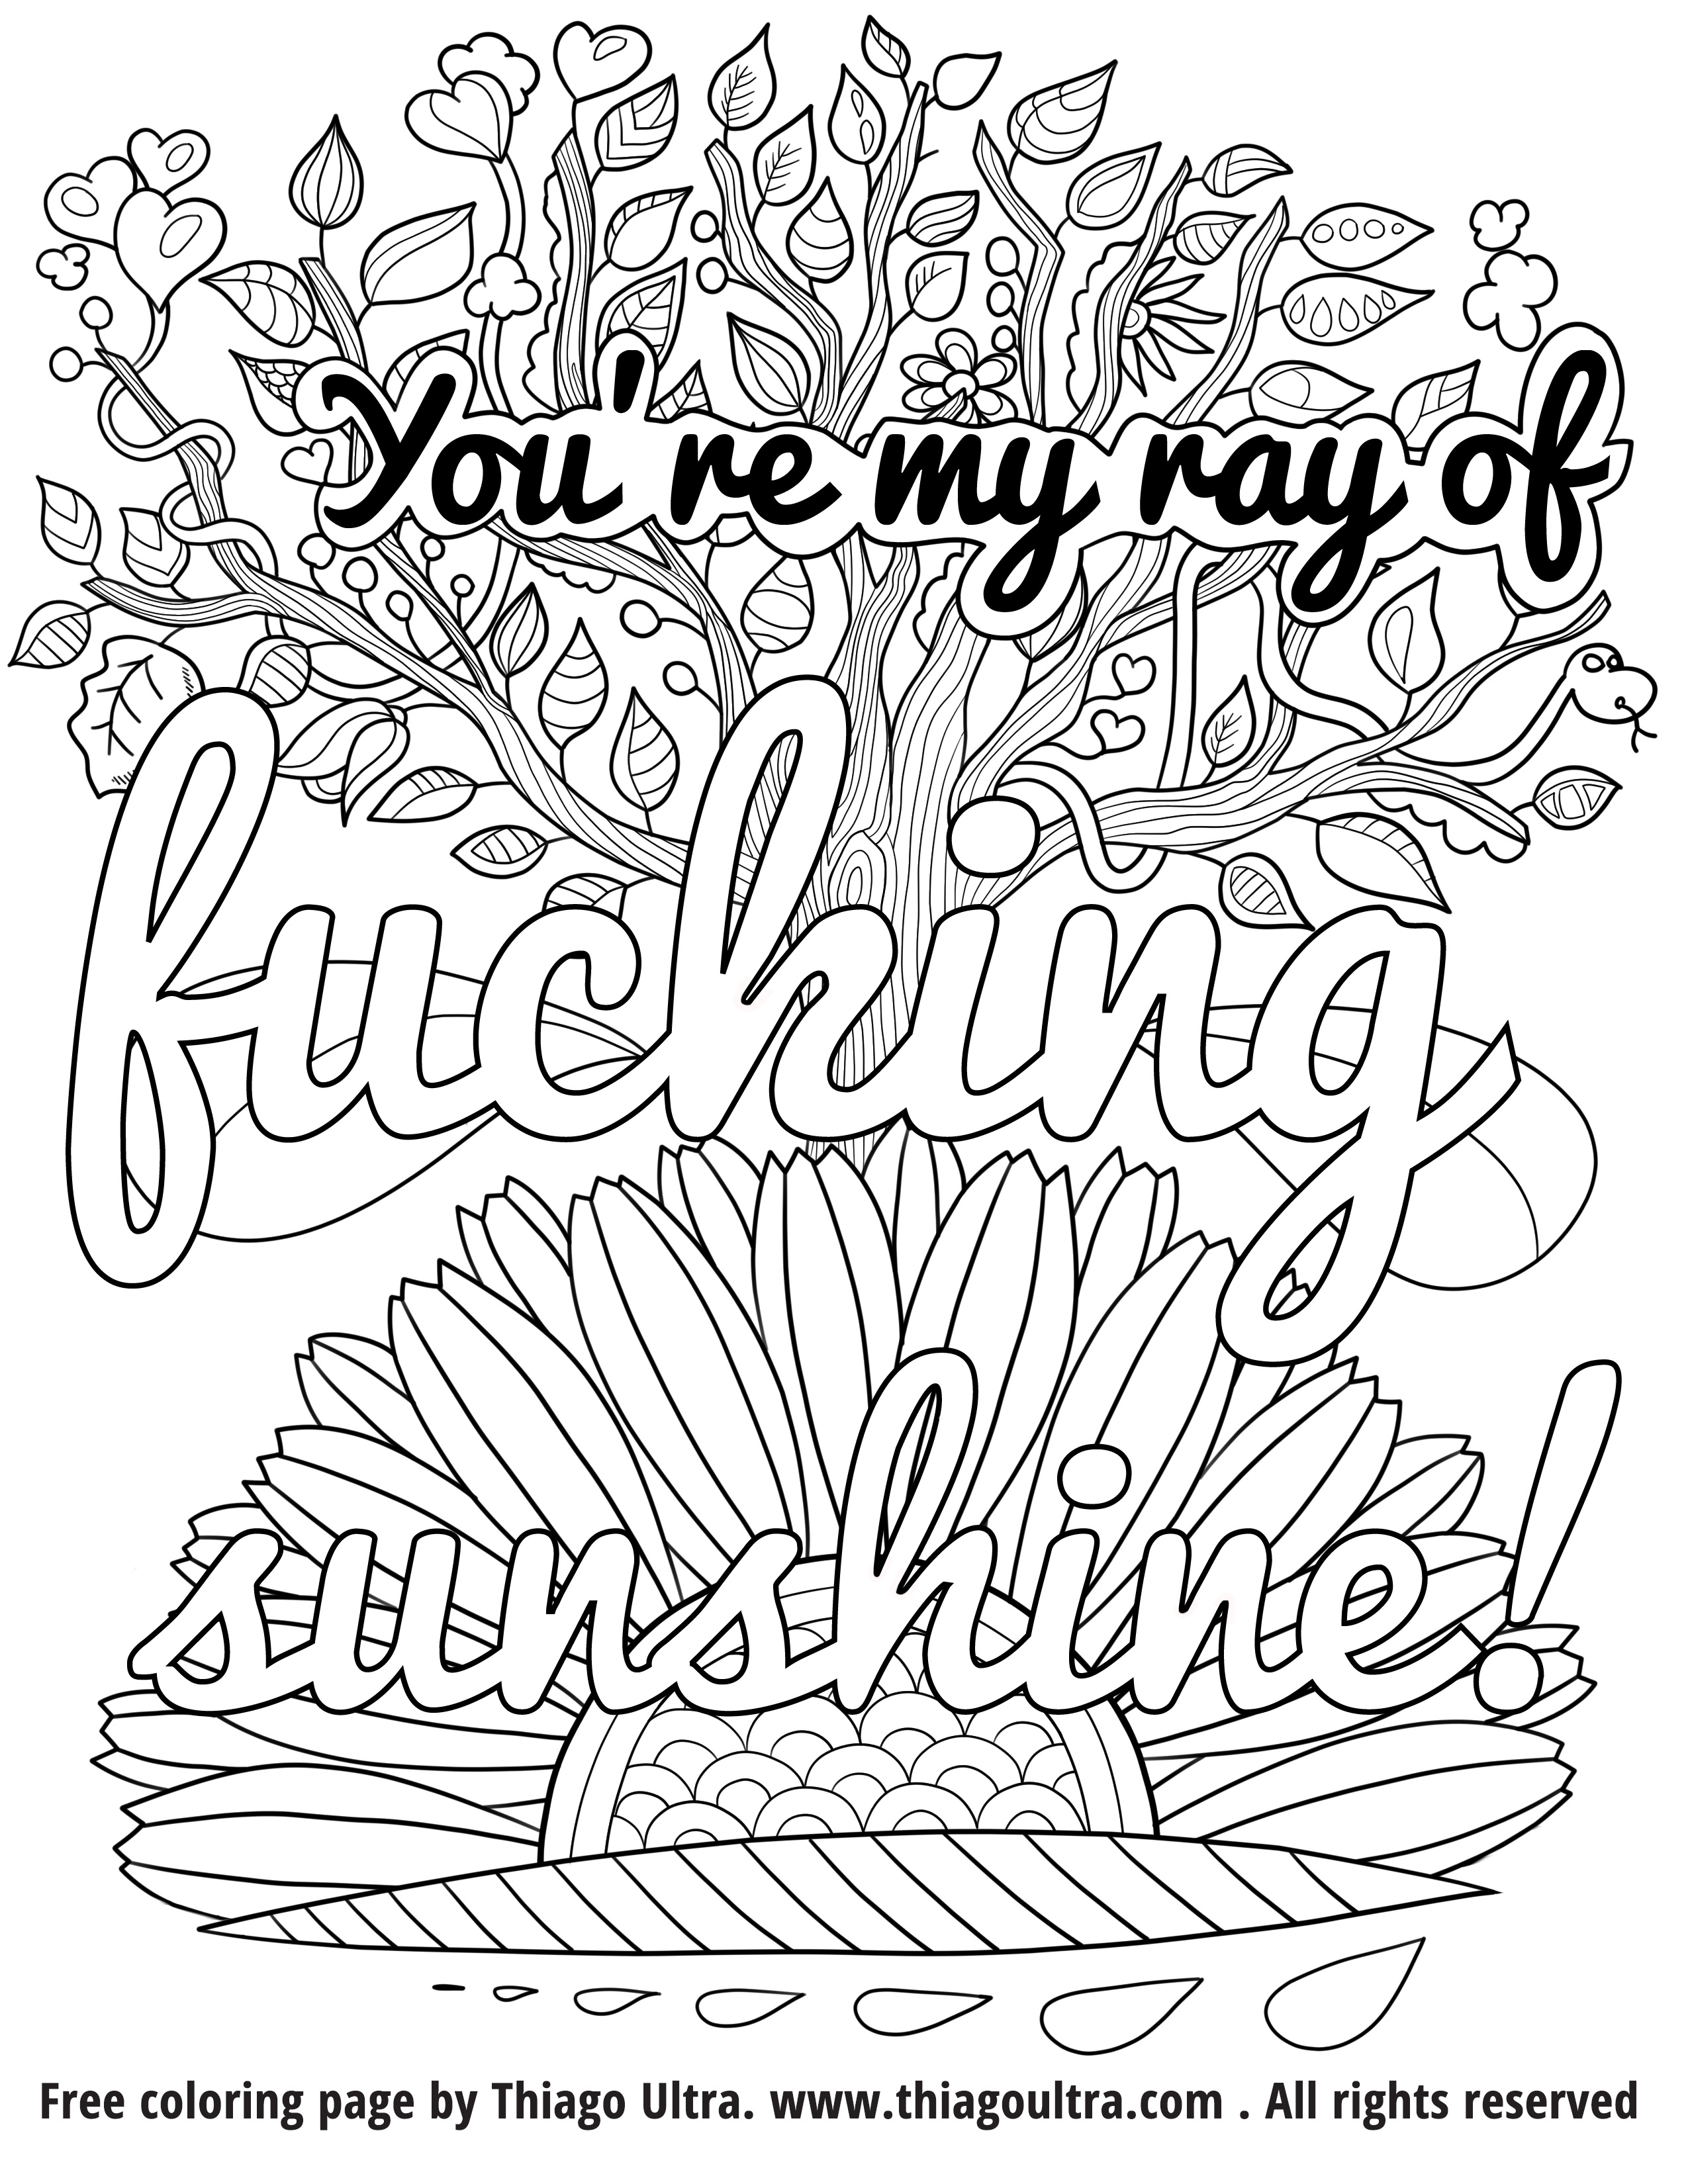 Coloring Ideas : 1840D37706A73E0C394A077851E5964E_Focus Free - Free Printable Swear Word Coloring Pages